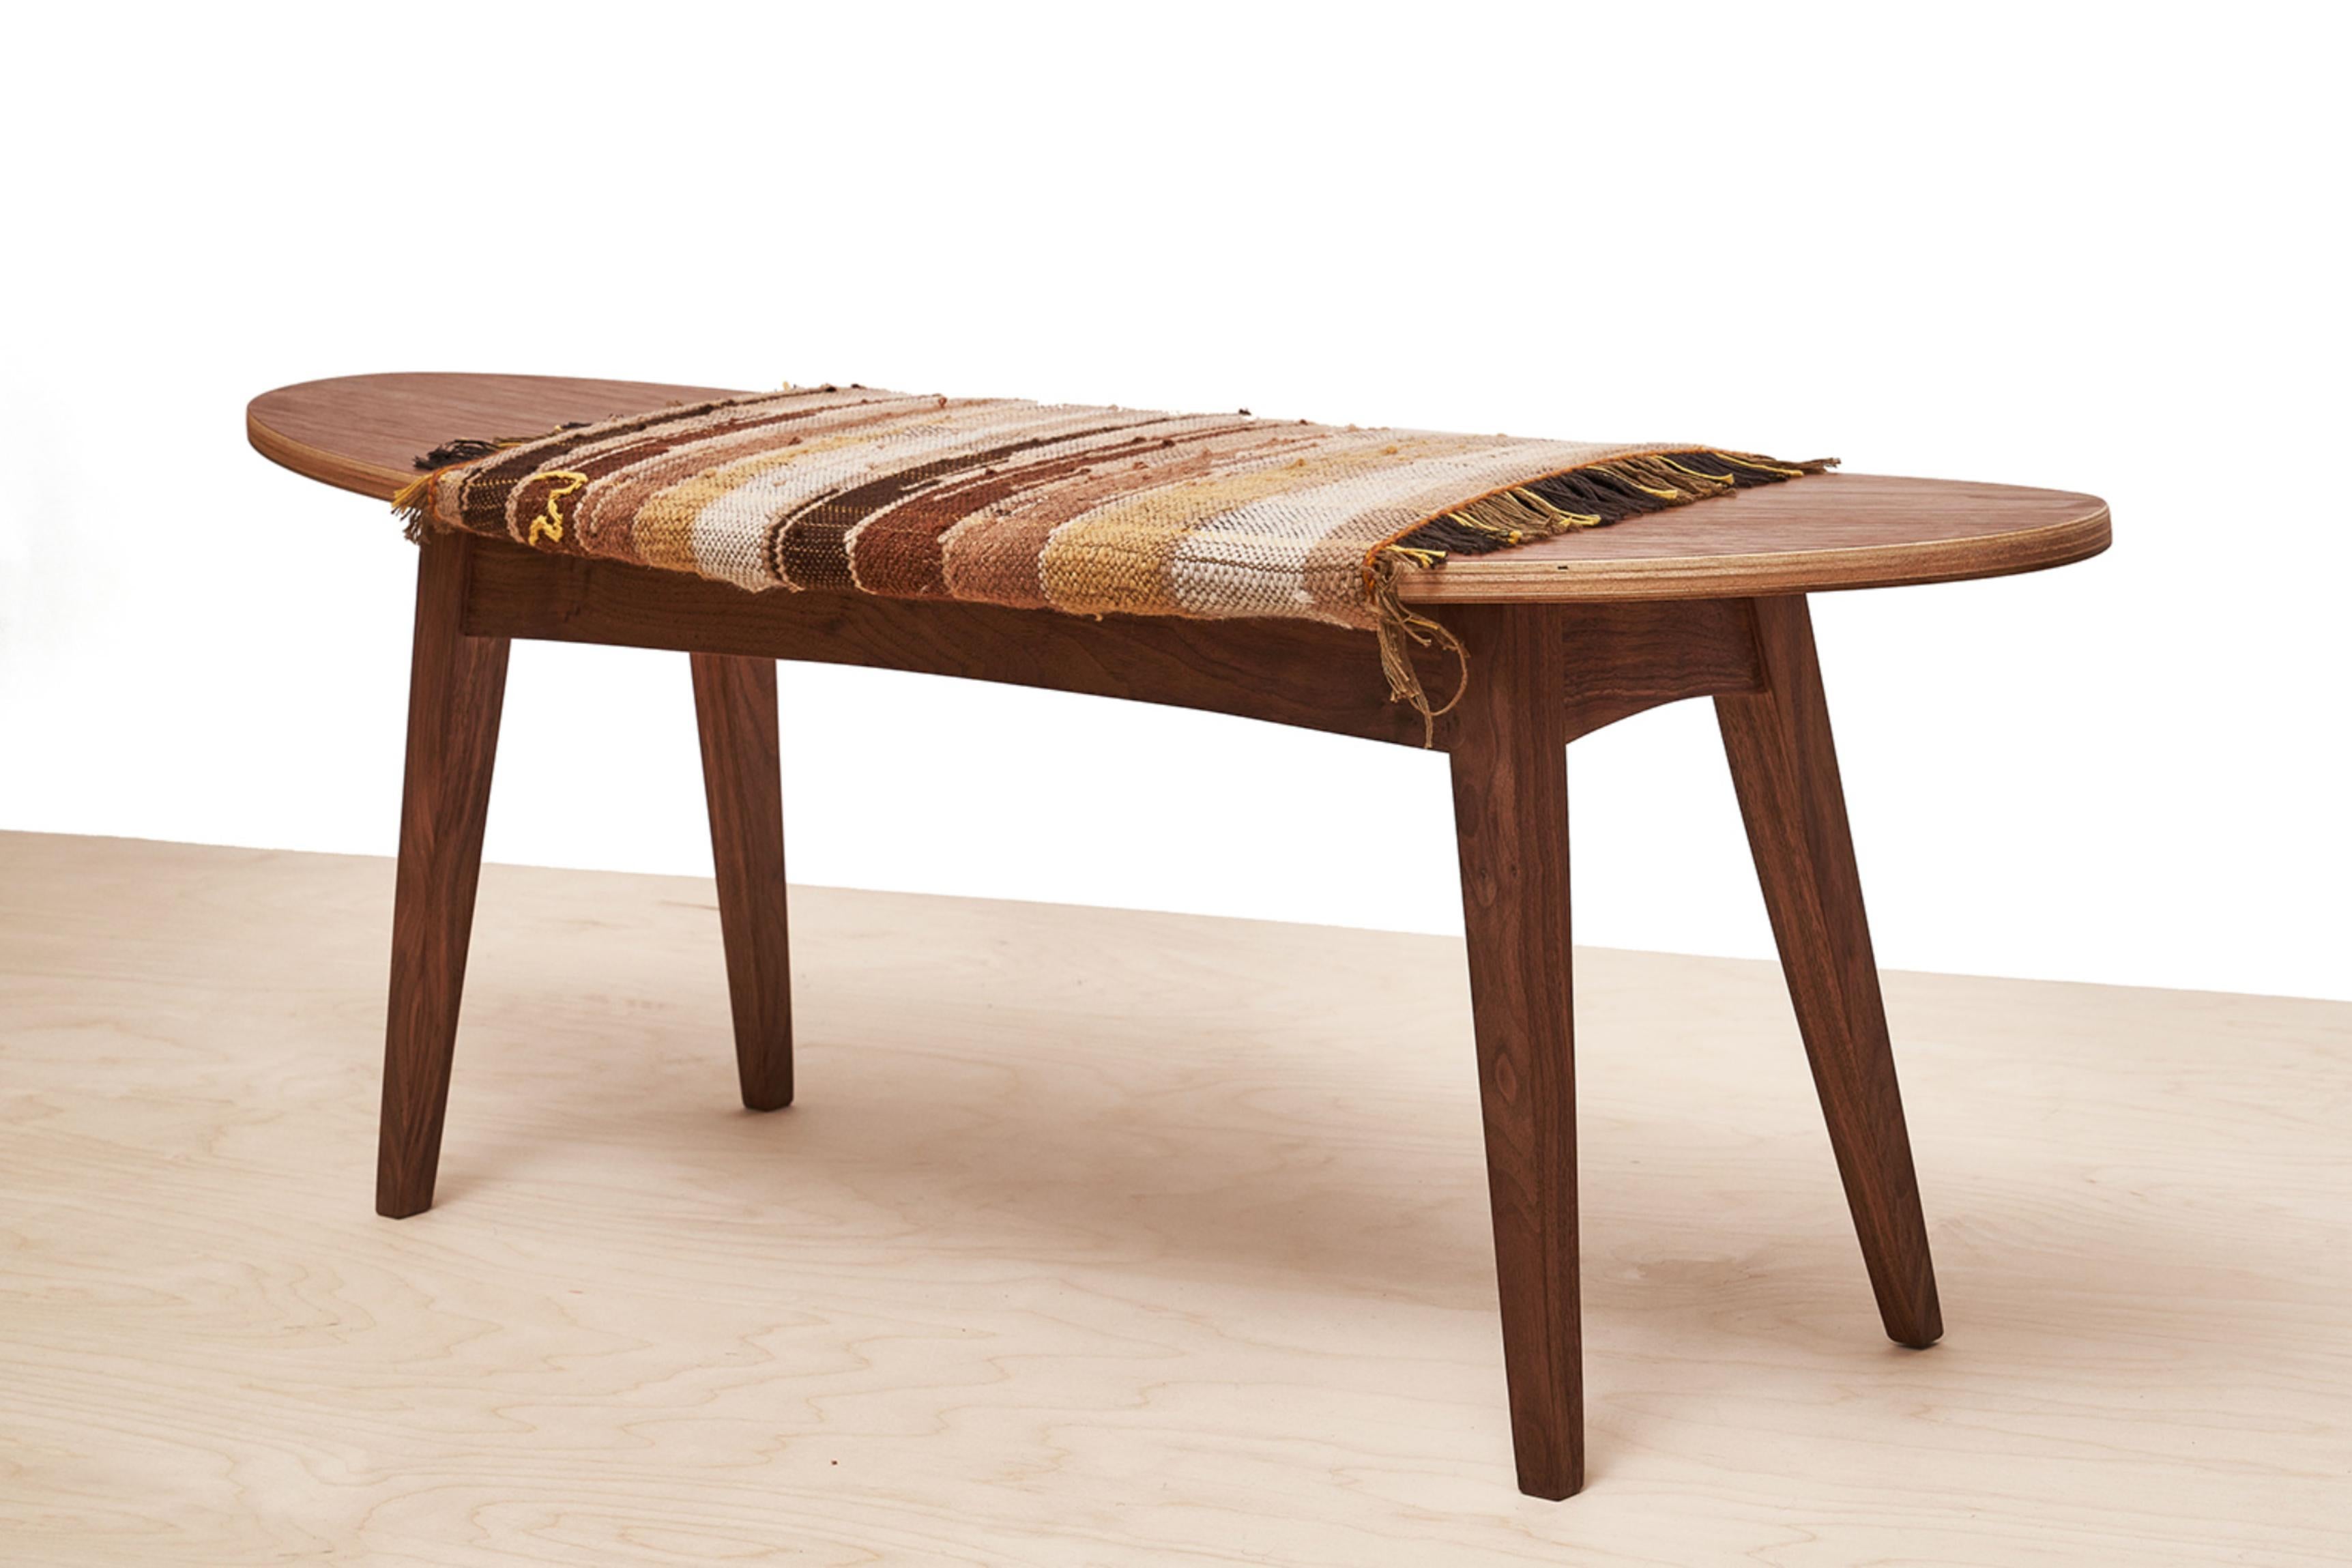 SURF Unic Bench by Jean-Baptiste Van den Heede
Dimensions: L 118 x D 34 x H 43 cm
Materials: Oak, Textile.
Also Available: Other textiles available,

The “SURF unic” version proposes a versatile bench since it can be used without upholstery or